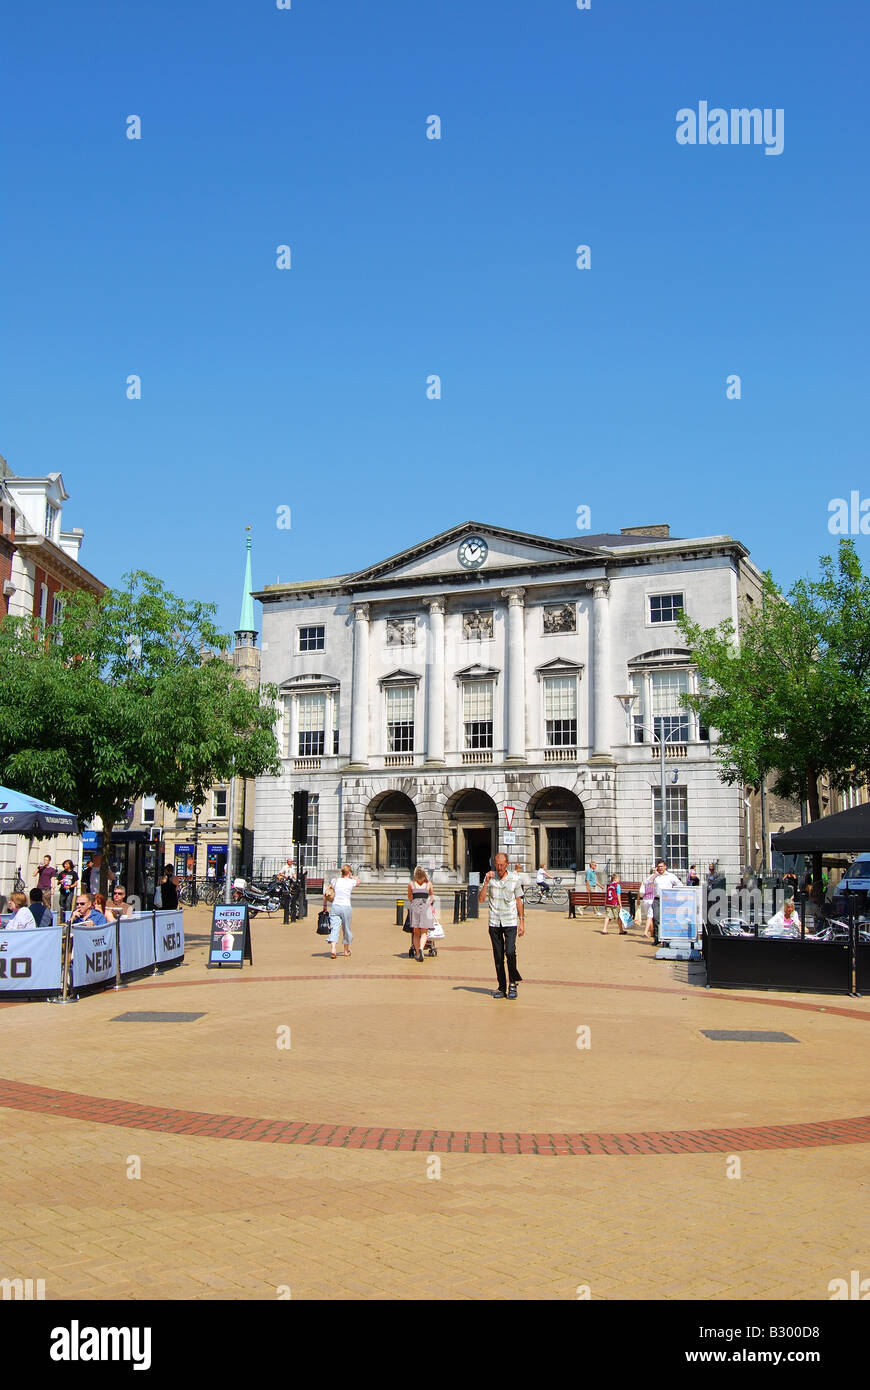 Shire Hall from pedestrianised High Street, Chelmsford, Essex, England, United Kingdom Stock Photo